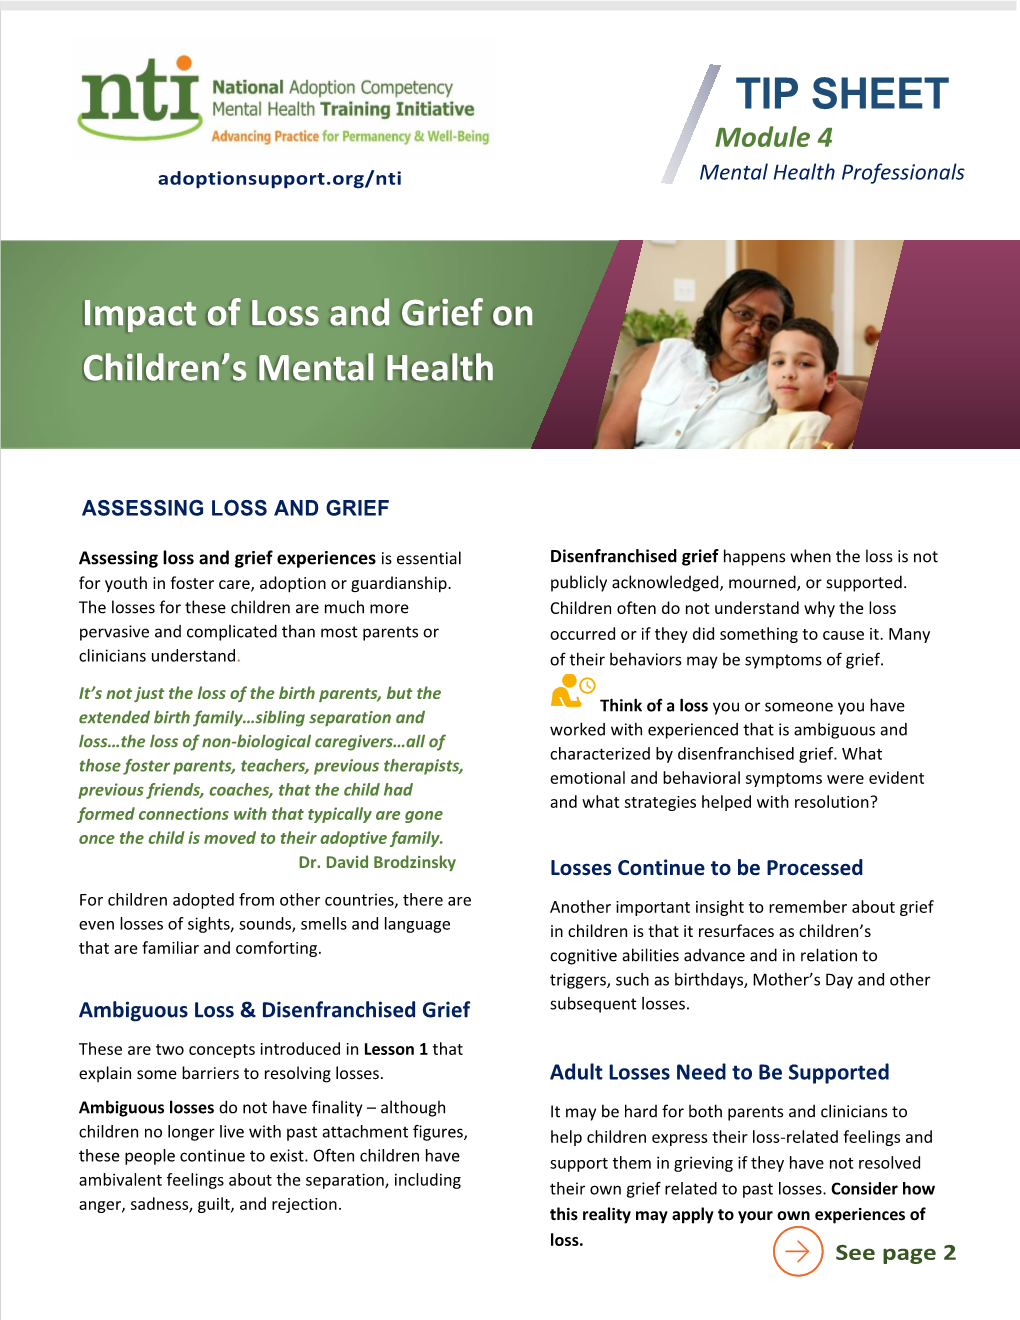 Impact of Loss and Grief on Children's Mental Health